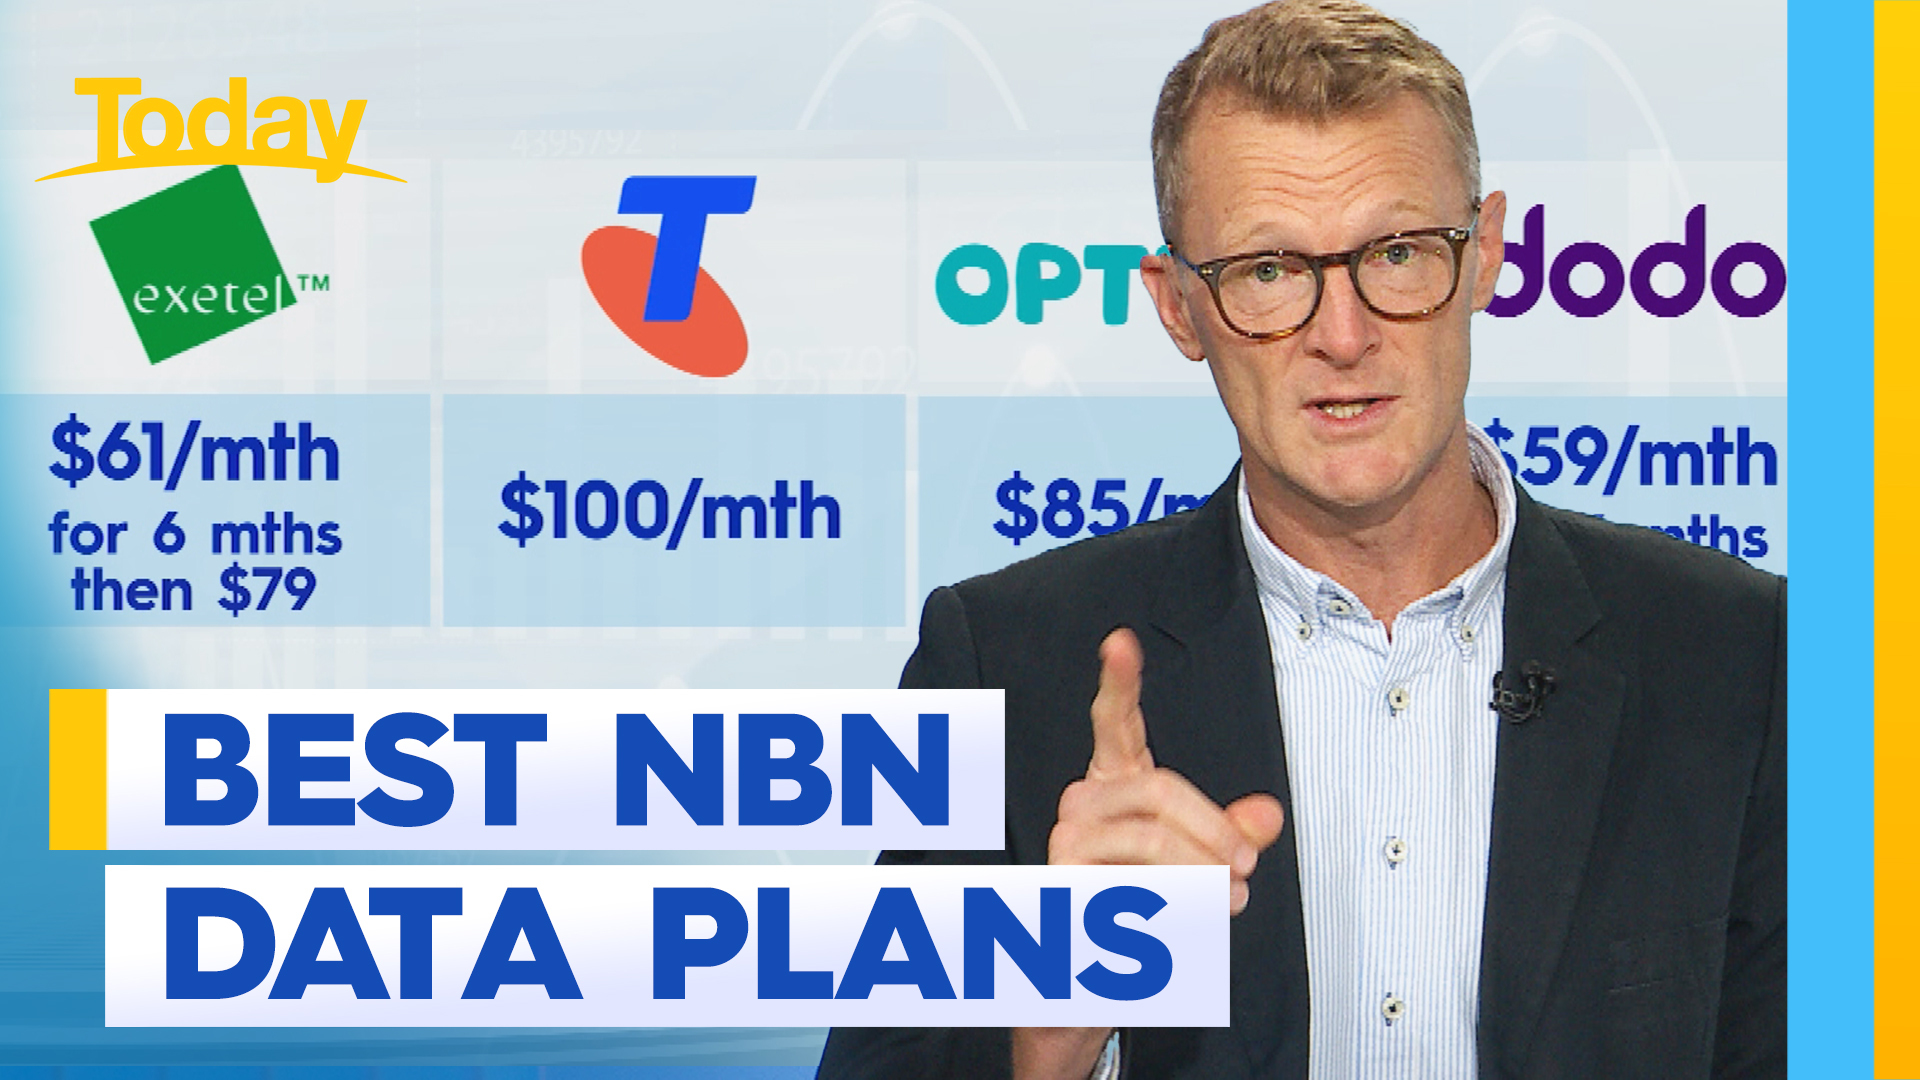 Best NBN data plans for your home